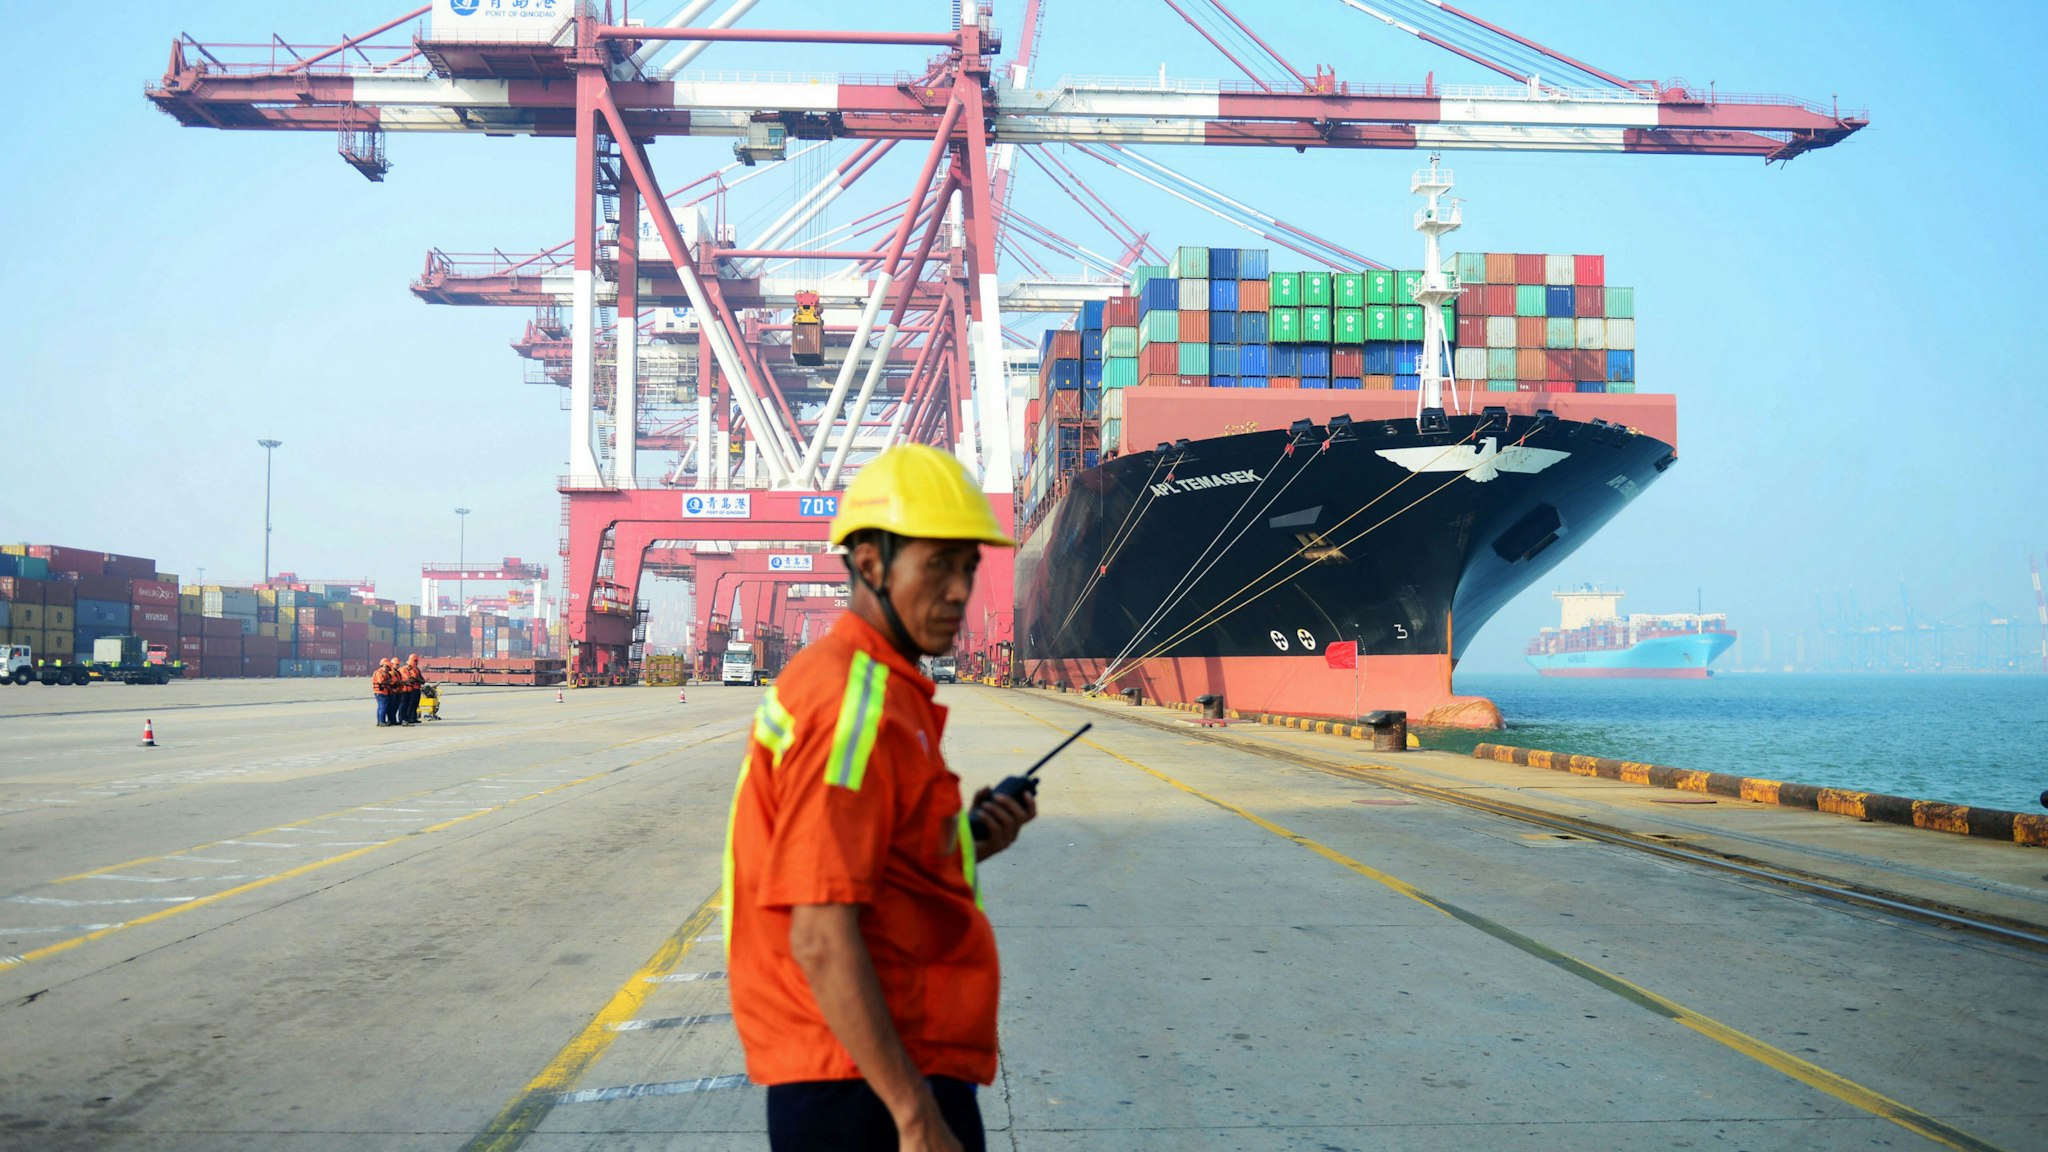 A Chinese worker looks on as a cargo ship is loaded at a port in Qingdao, eastern China's Shandong province on July 13, 2017. China's exports rose a forecast-beating 11.3 percent on-year in June, data showed July 13, fuelling hopes of stability in the world's second-largest economy.